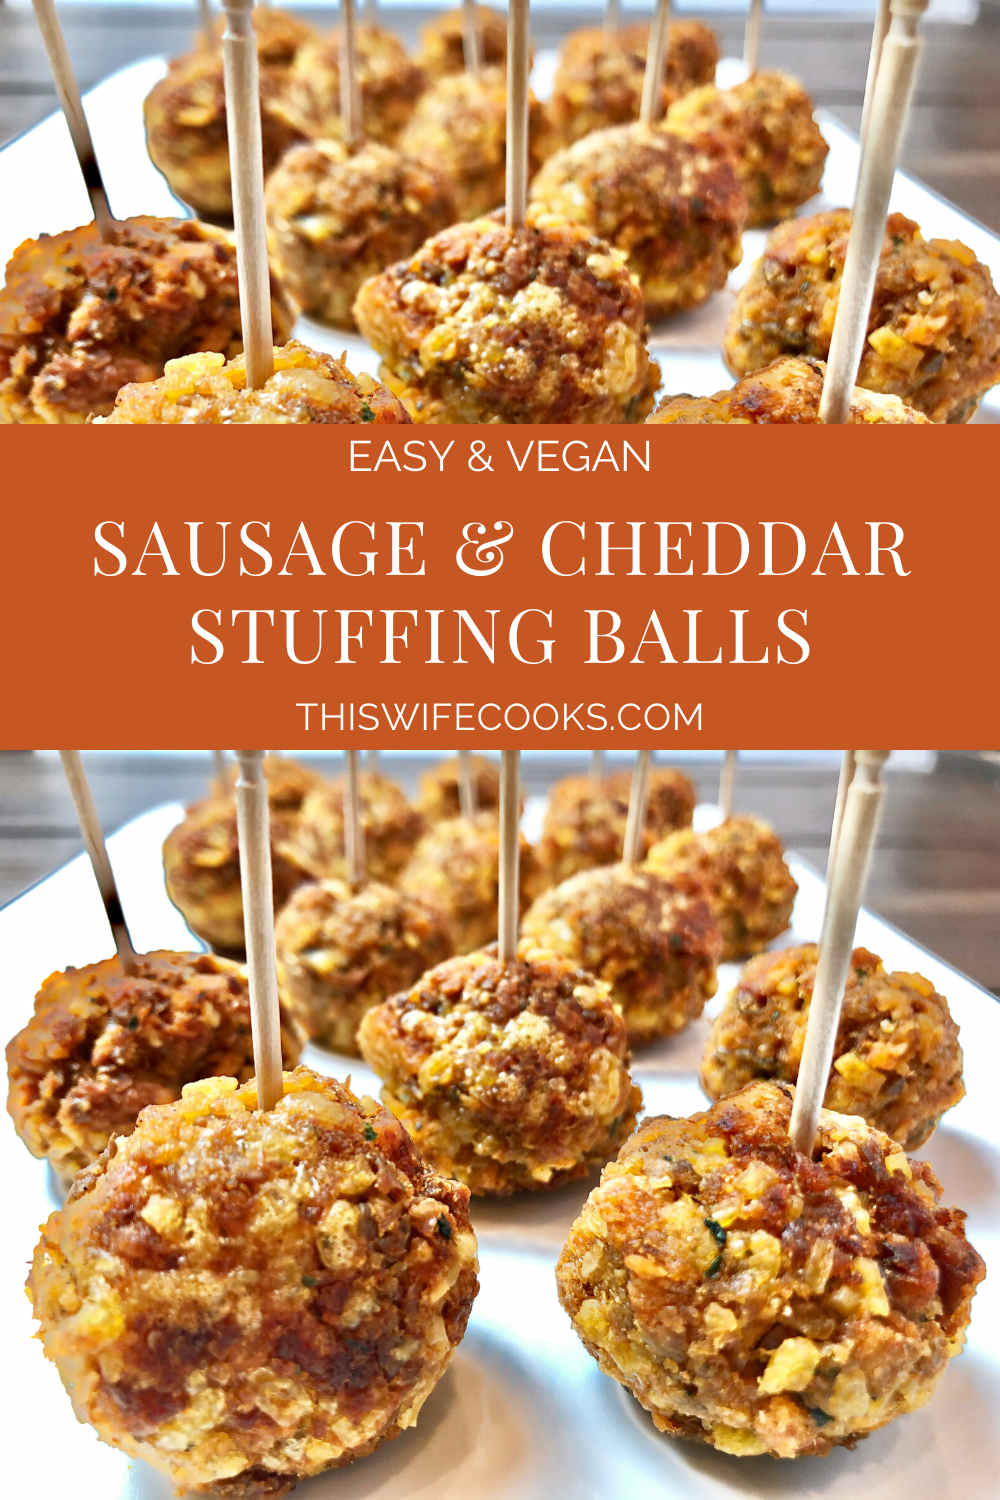 Vegan Sausage and Cheddar Stuffing Balls - Lightly crispy on the outside and tender on the inside, these crowd-pleasing sausage and cheddar stuffing balls are the perfect addition to your Thanksgiving or Christmas appetizer spread. Make a double batch and freeze some to have on hand for Super Bowl Sunday. ;) via @thiswifecooks